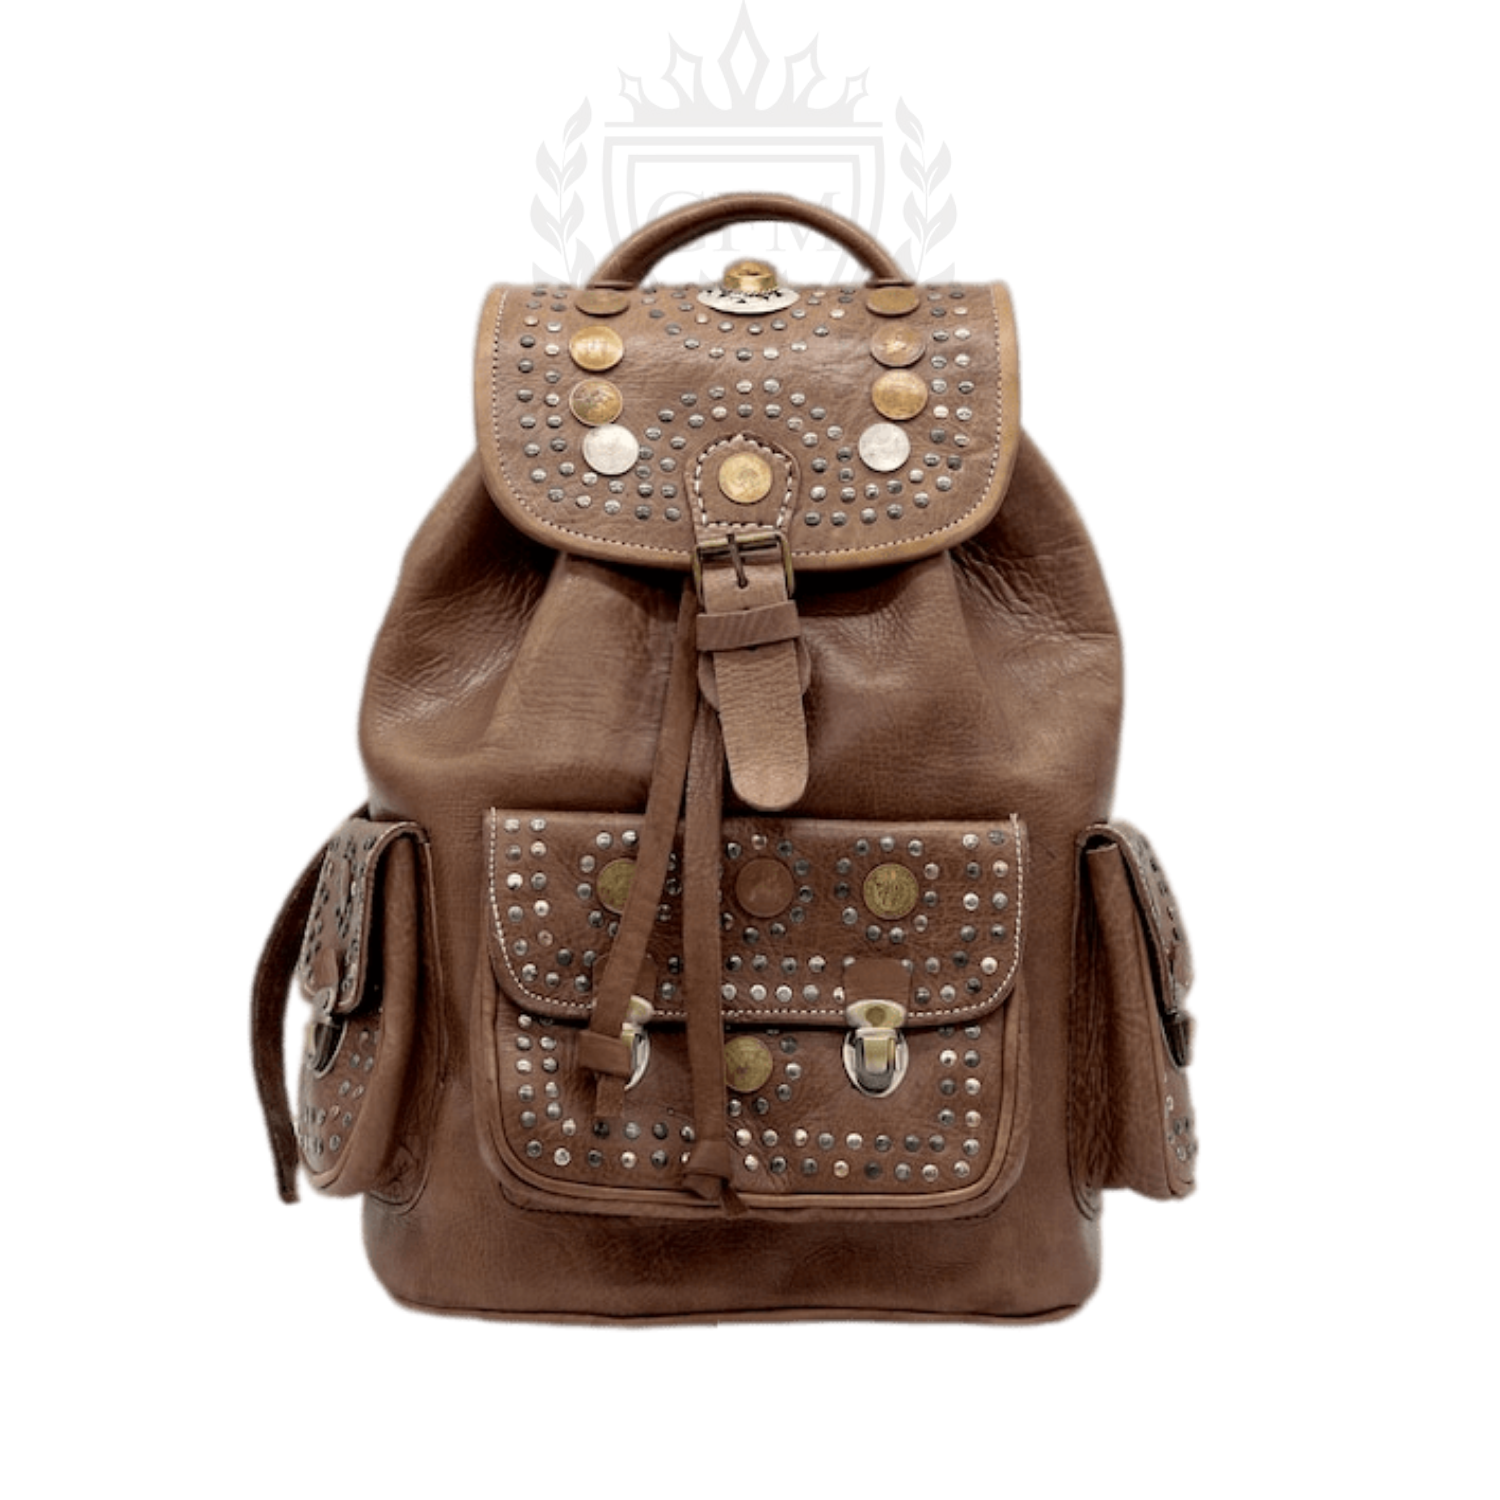 Moroccan Leather Boho Backpack - Vintage Style Women's Travel Rucksack